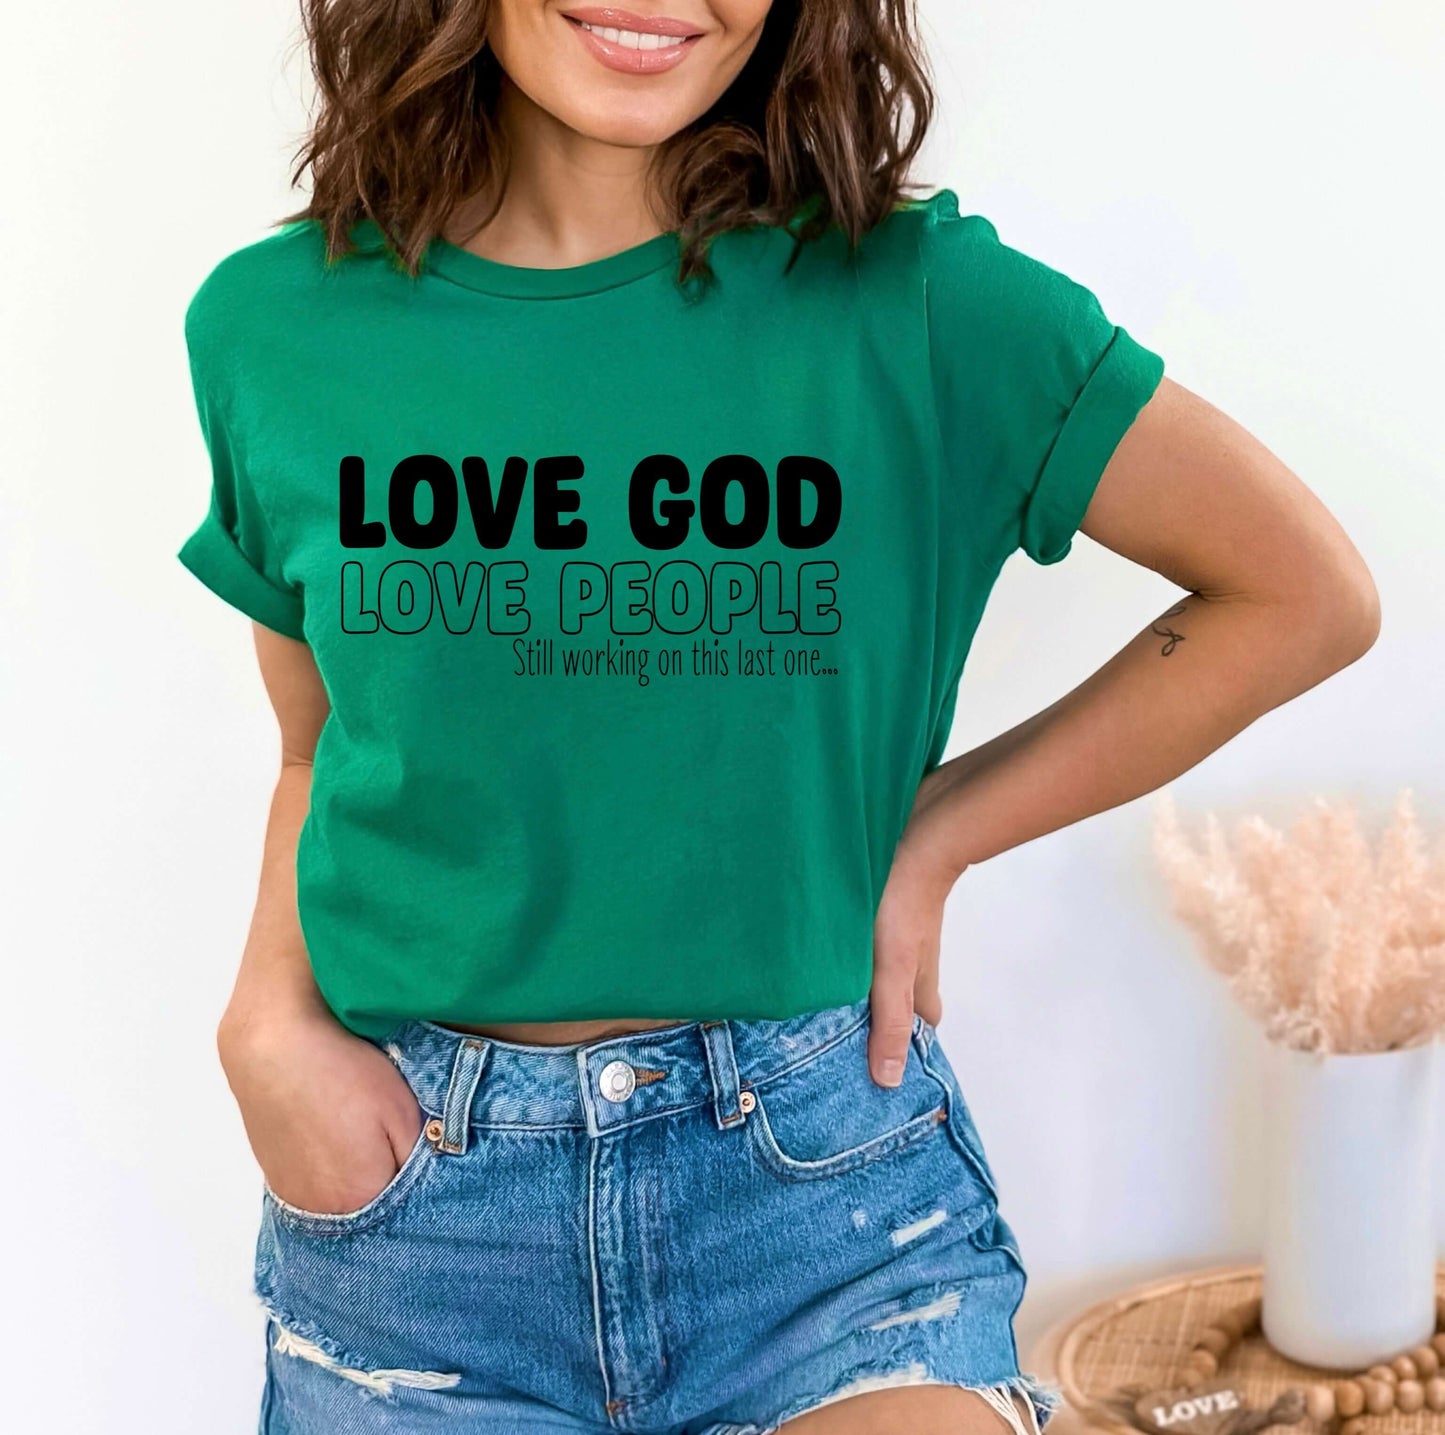 Love God Love People (still working on the last one) Ladies T-Shirt